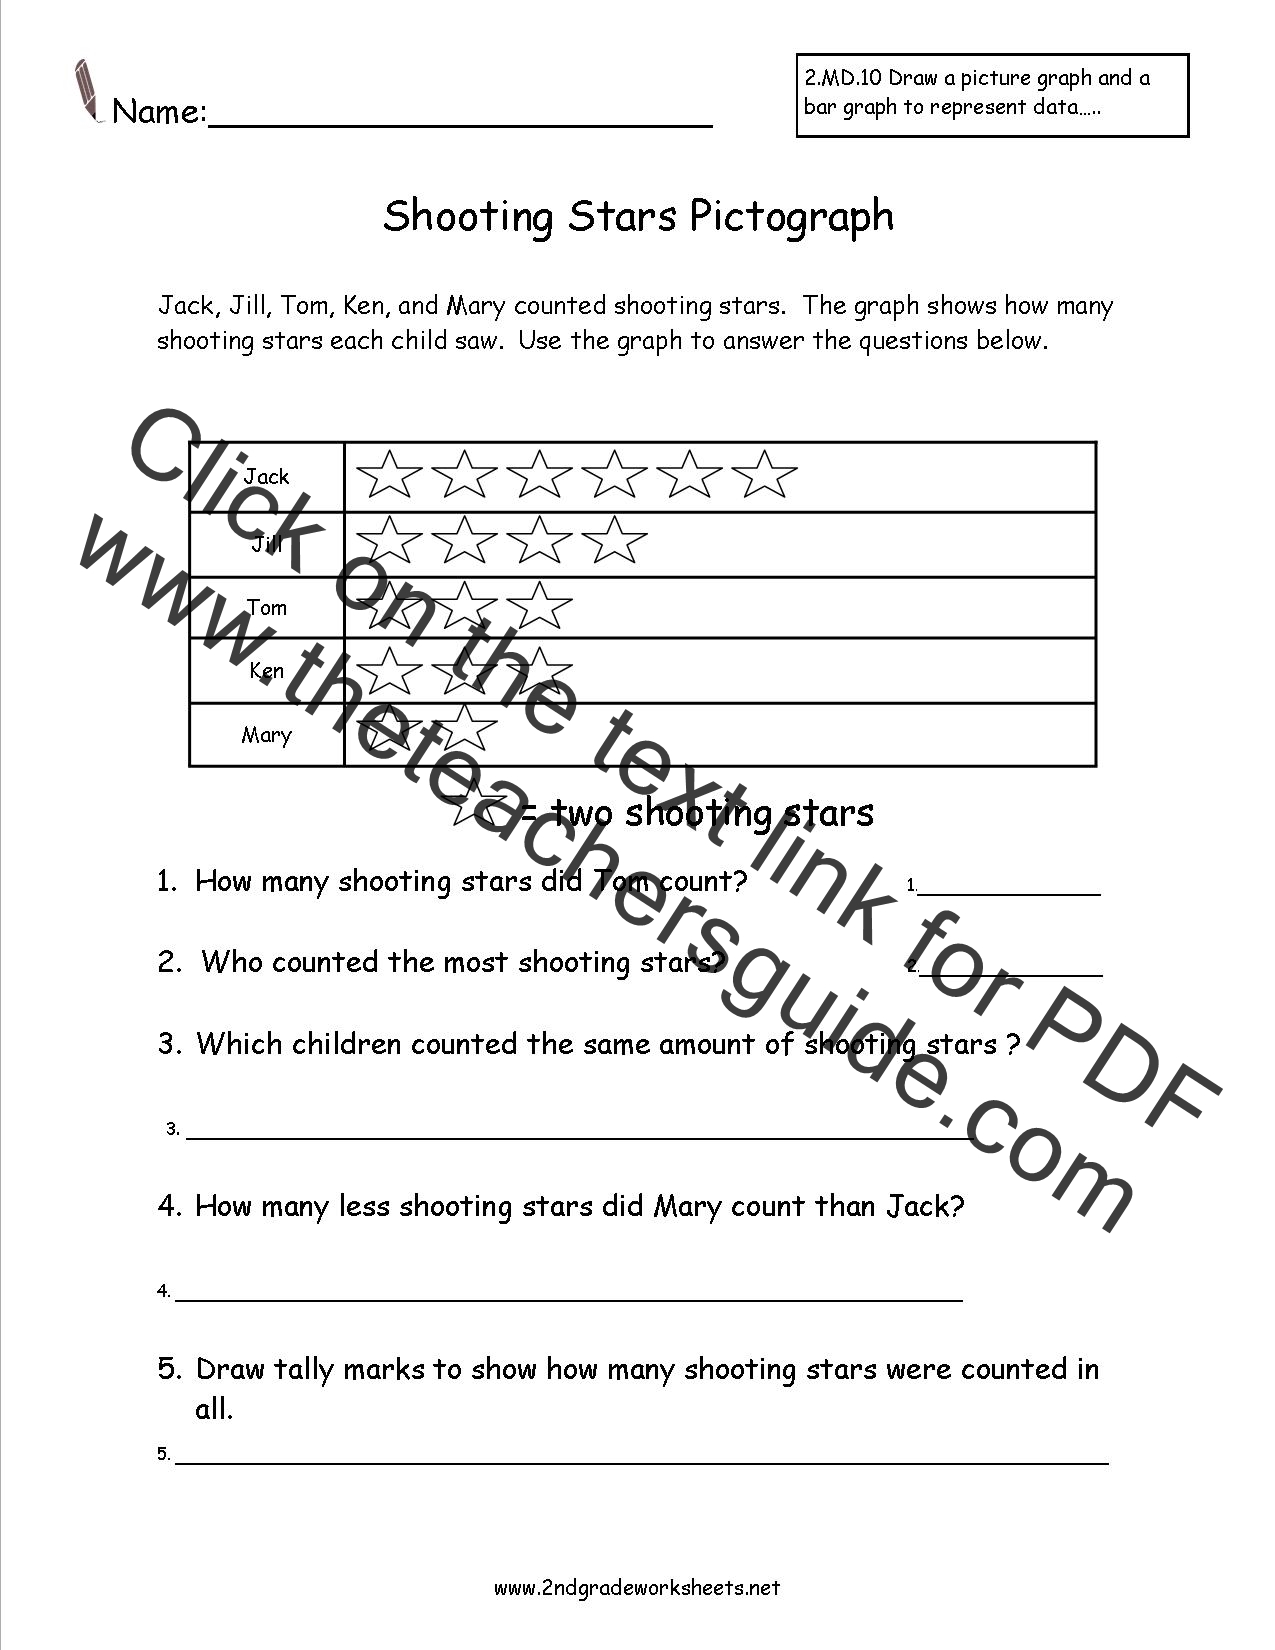 second-grade-reading-and-creating-pictograph-worksheets